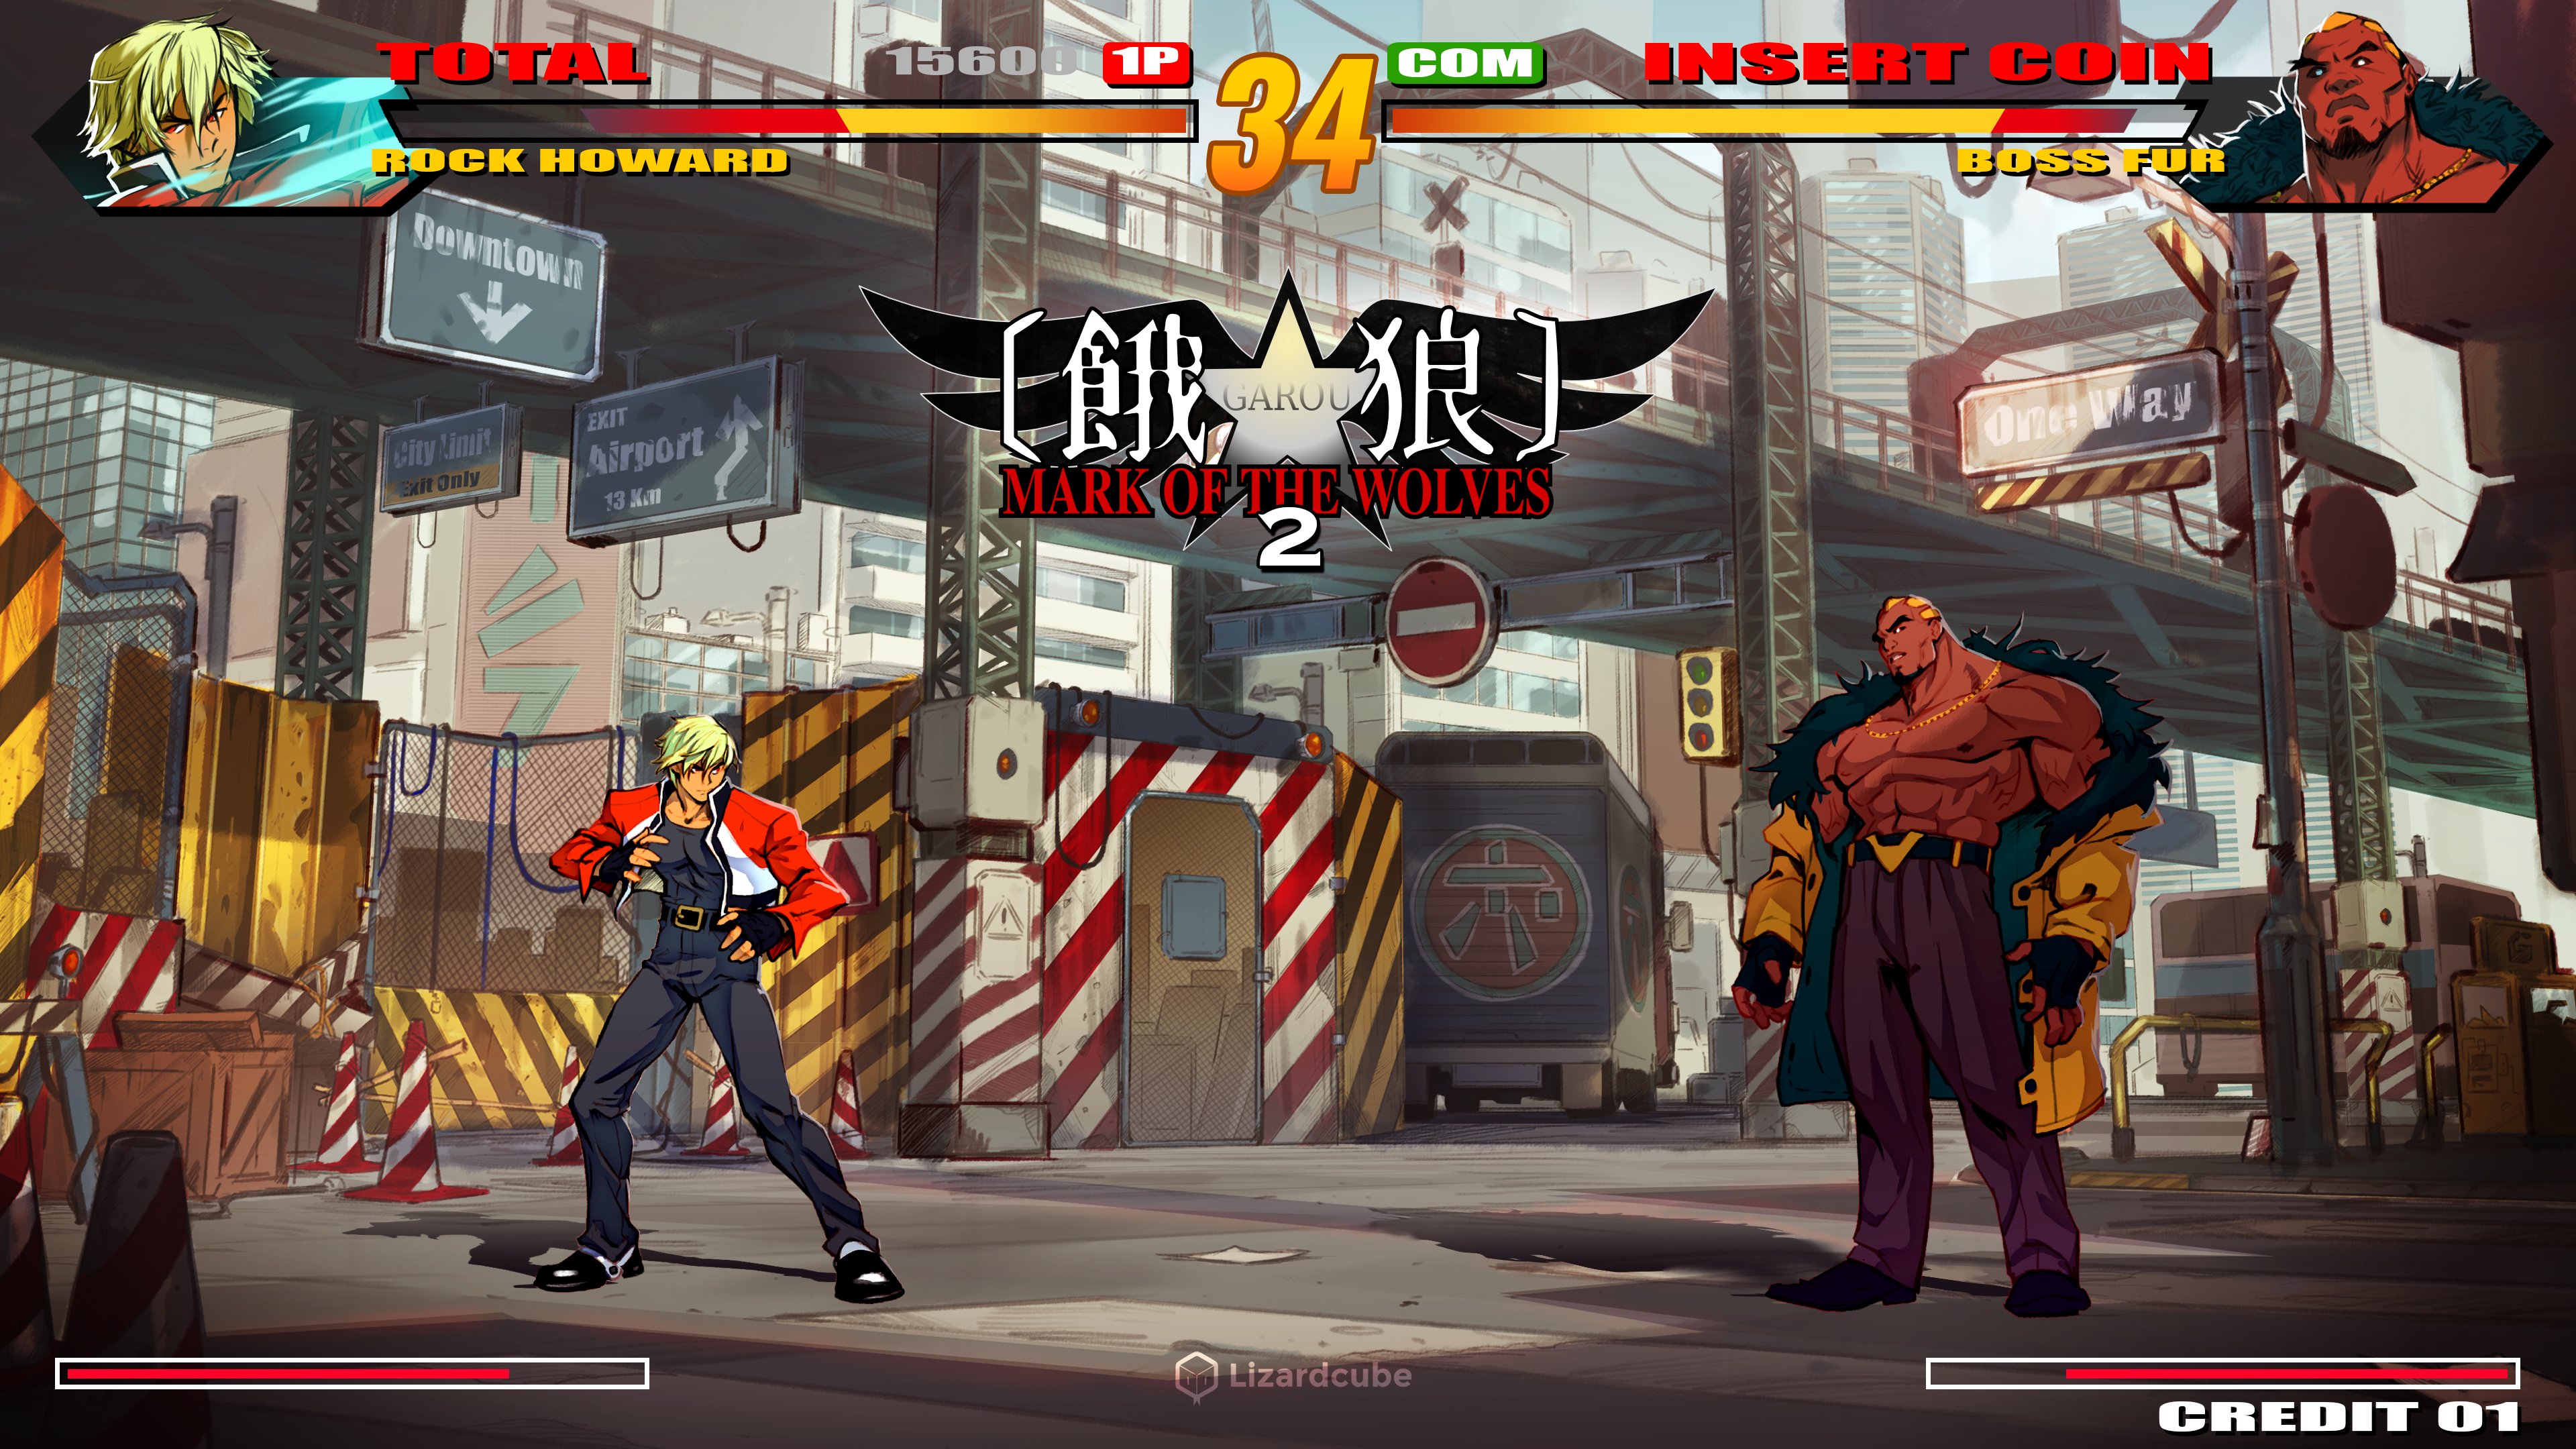 Fatal Fury: City of the Wolves, SNK Wiki